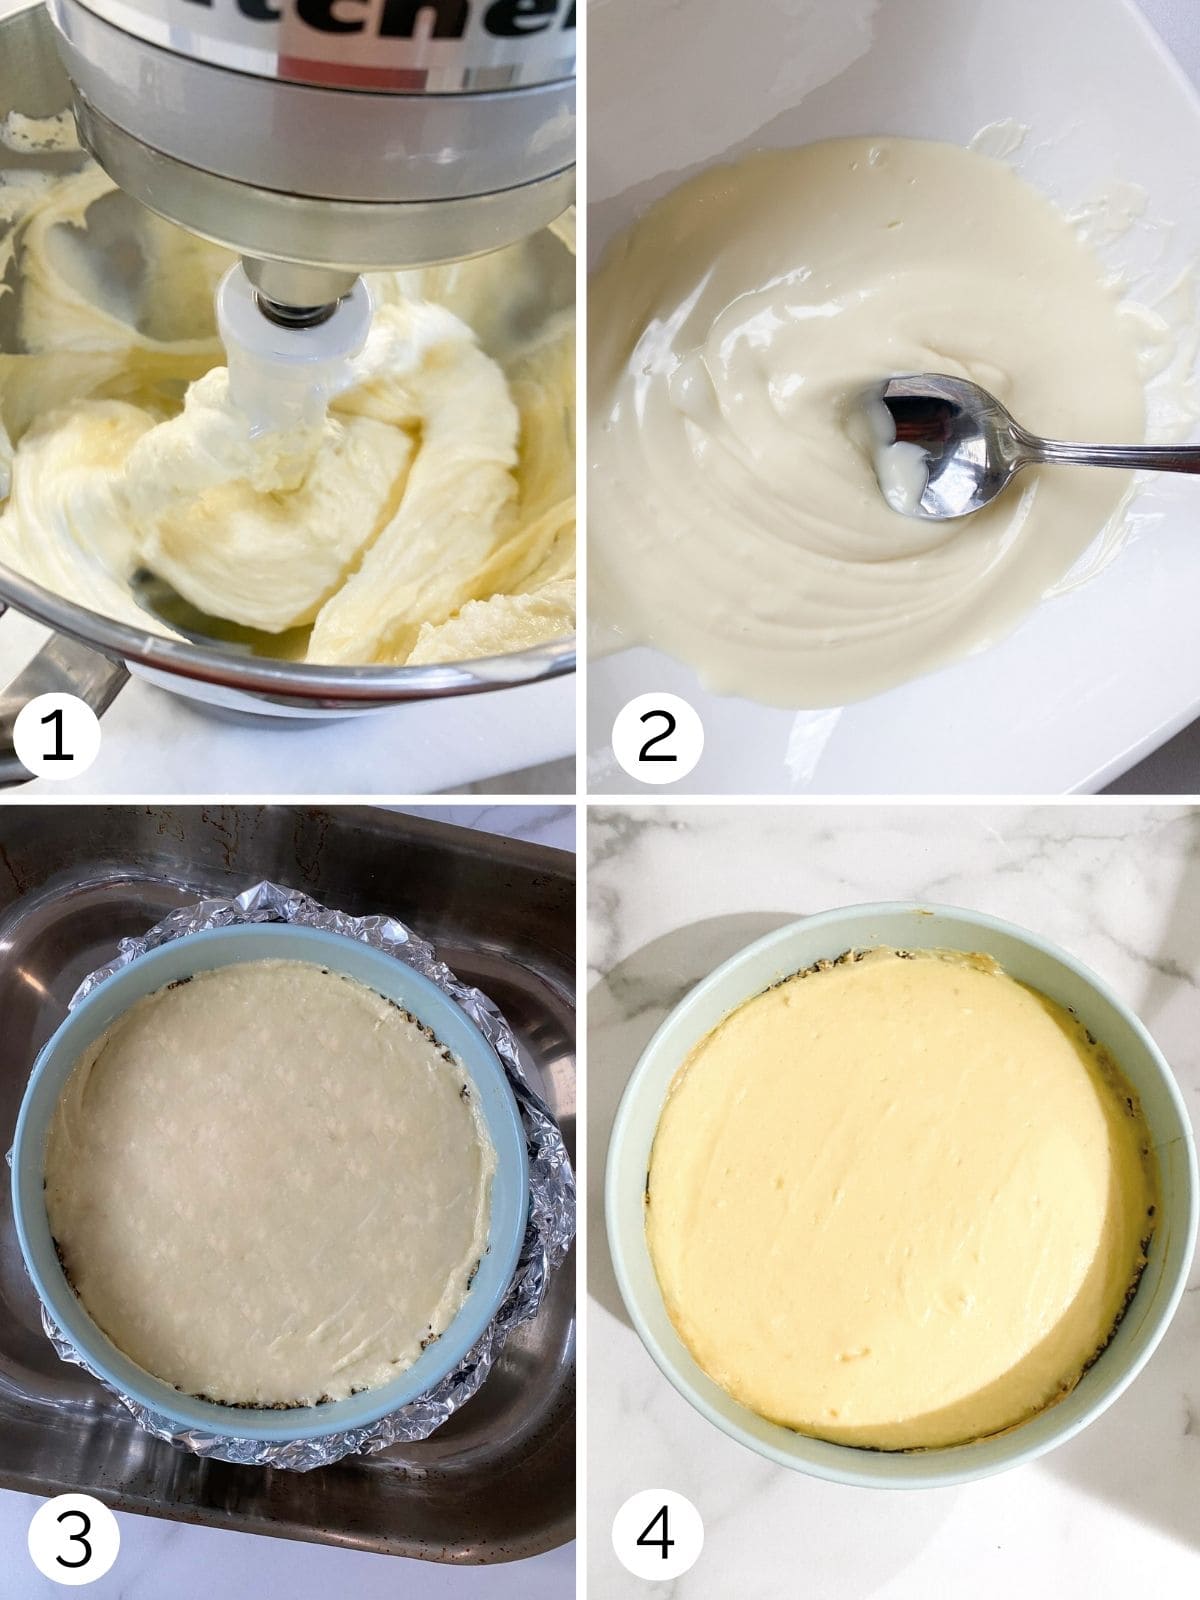 Step by step process for melting white chocolate and making cheesecake.